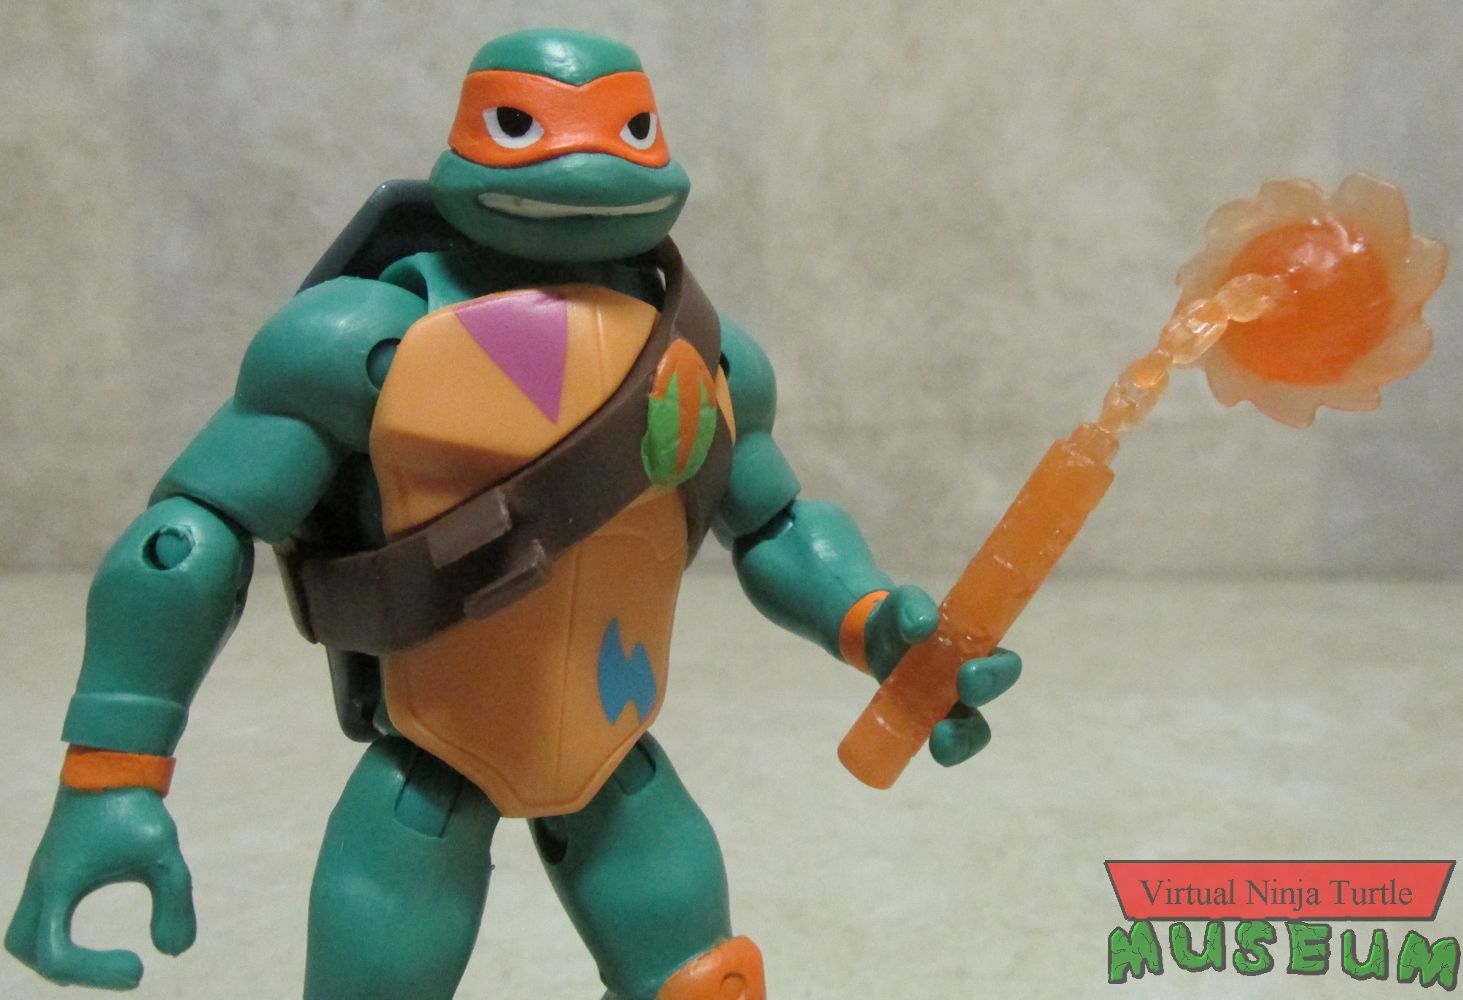 Michelangelo with powered up weapon